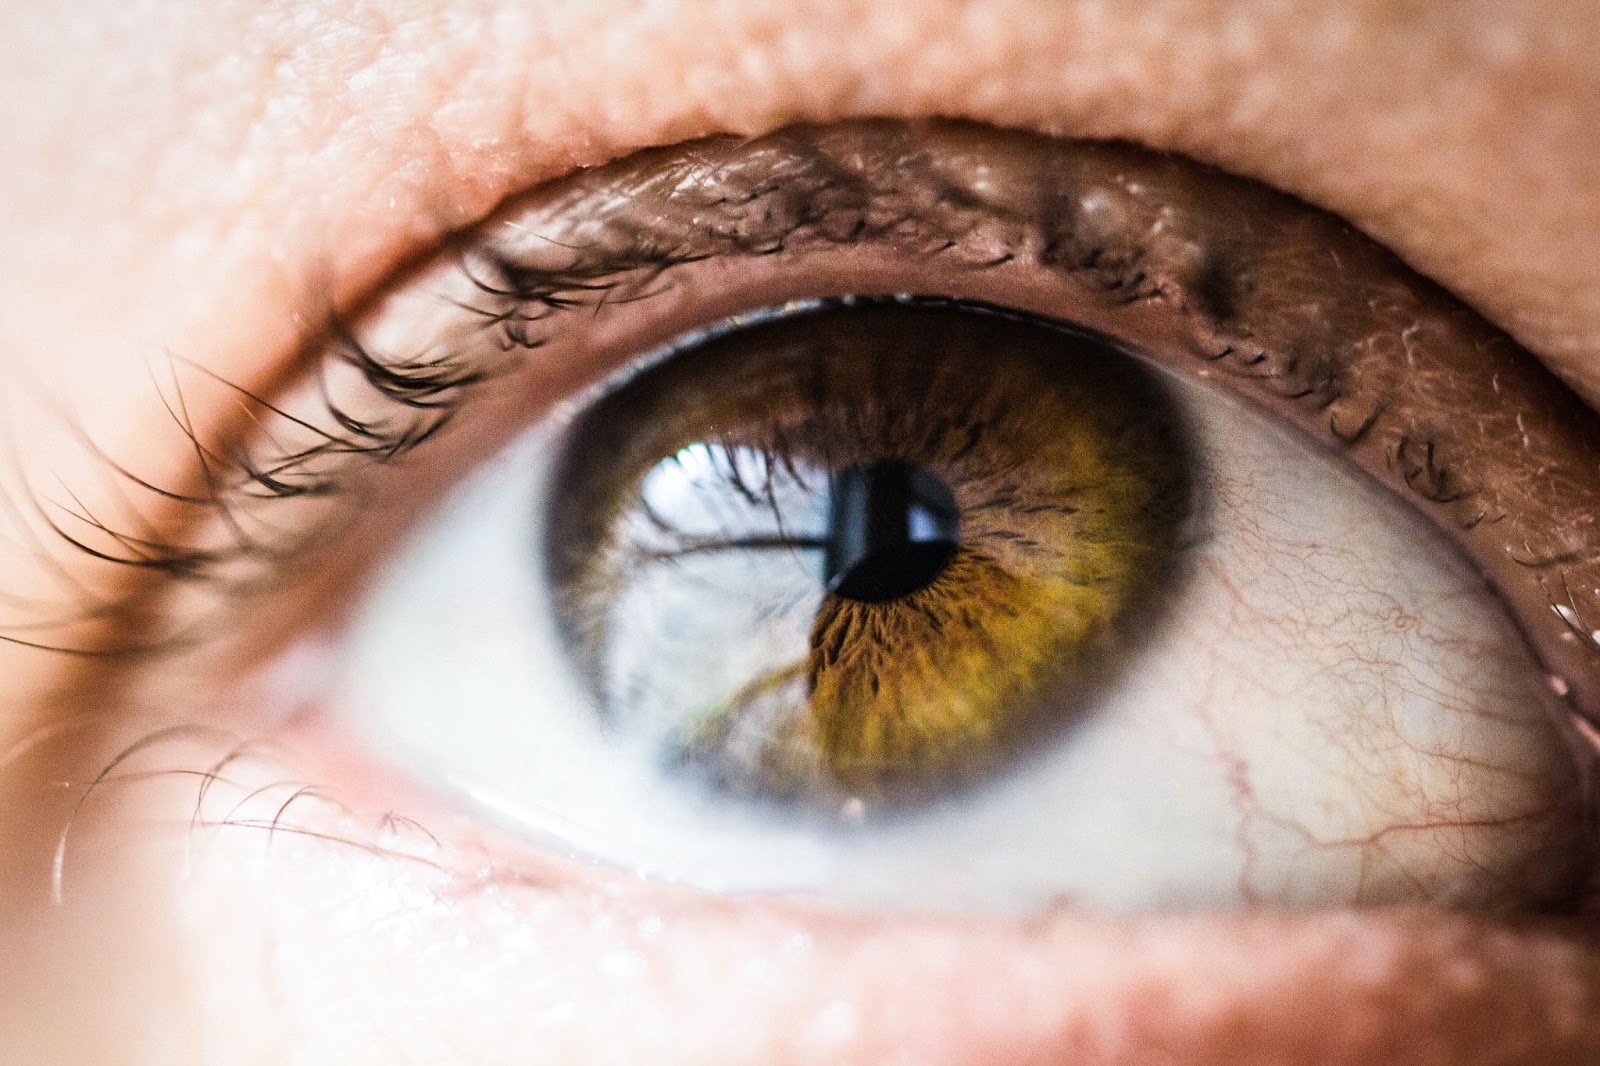  The iris is the eye's coloured portion, regulates the pupil's size